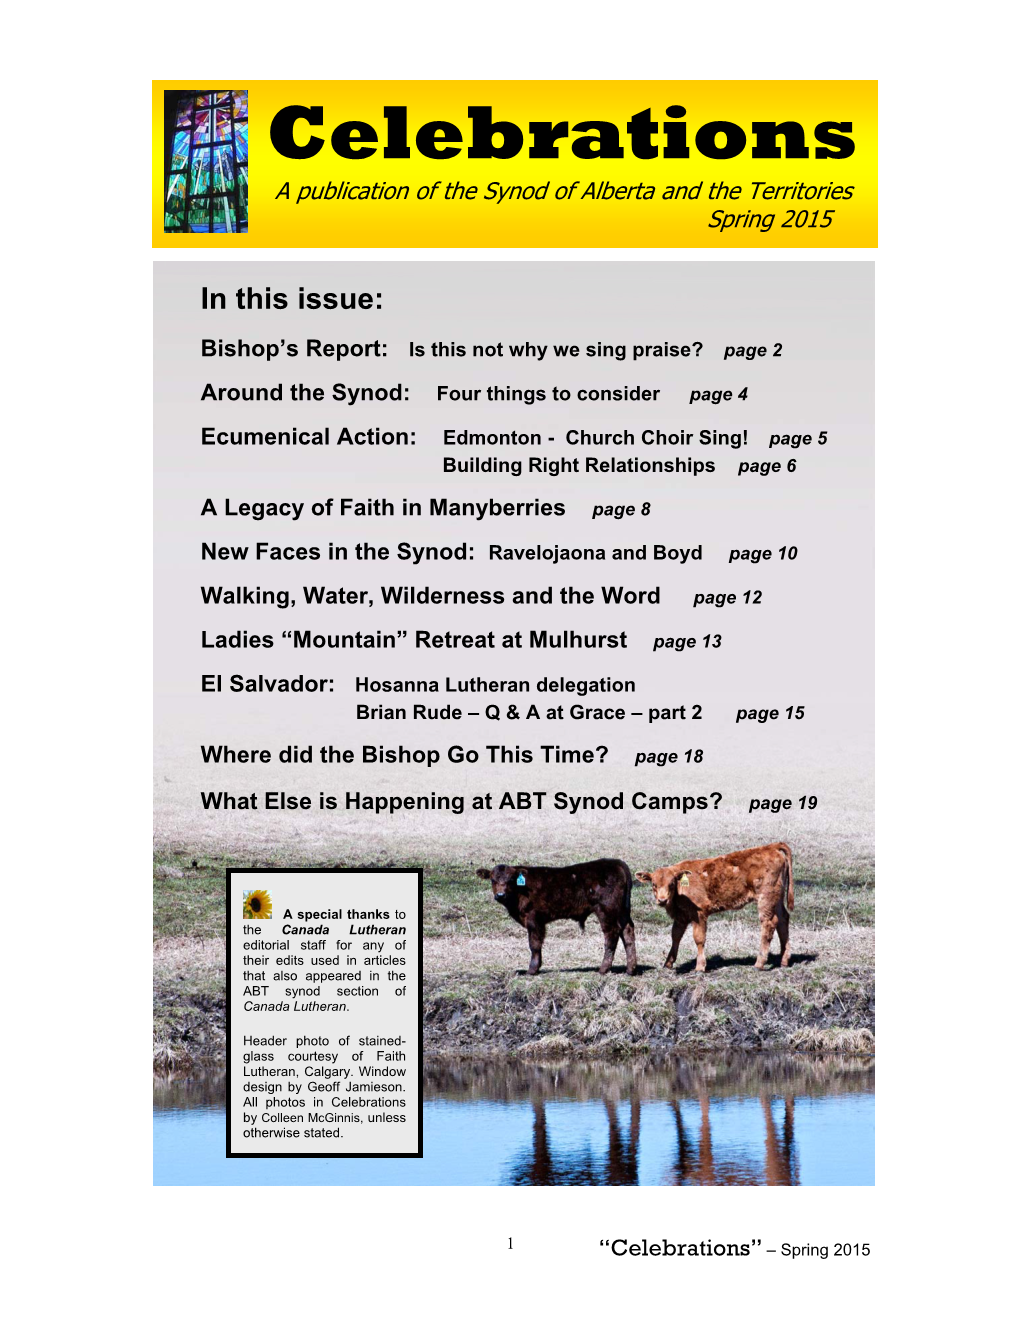 Celebrations a Publication of the Synod of Alberta and the Territories Spring 2015